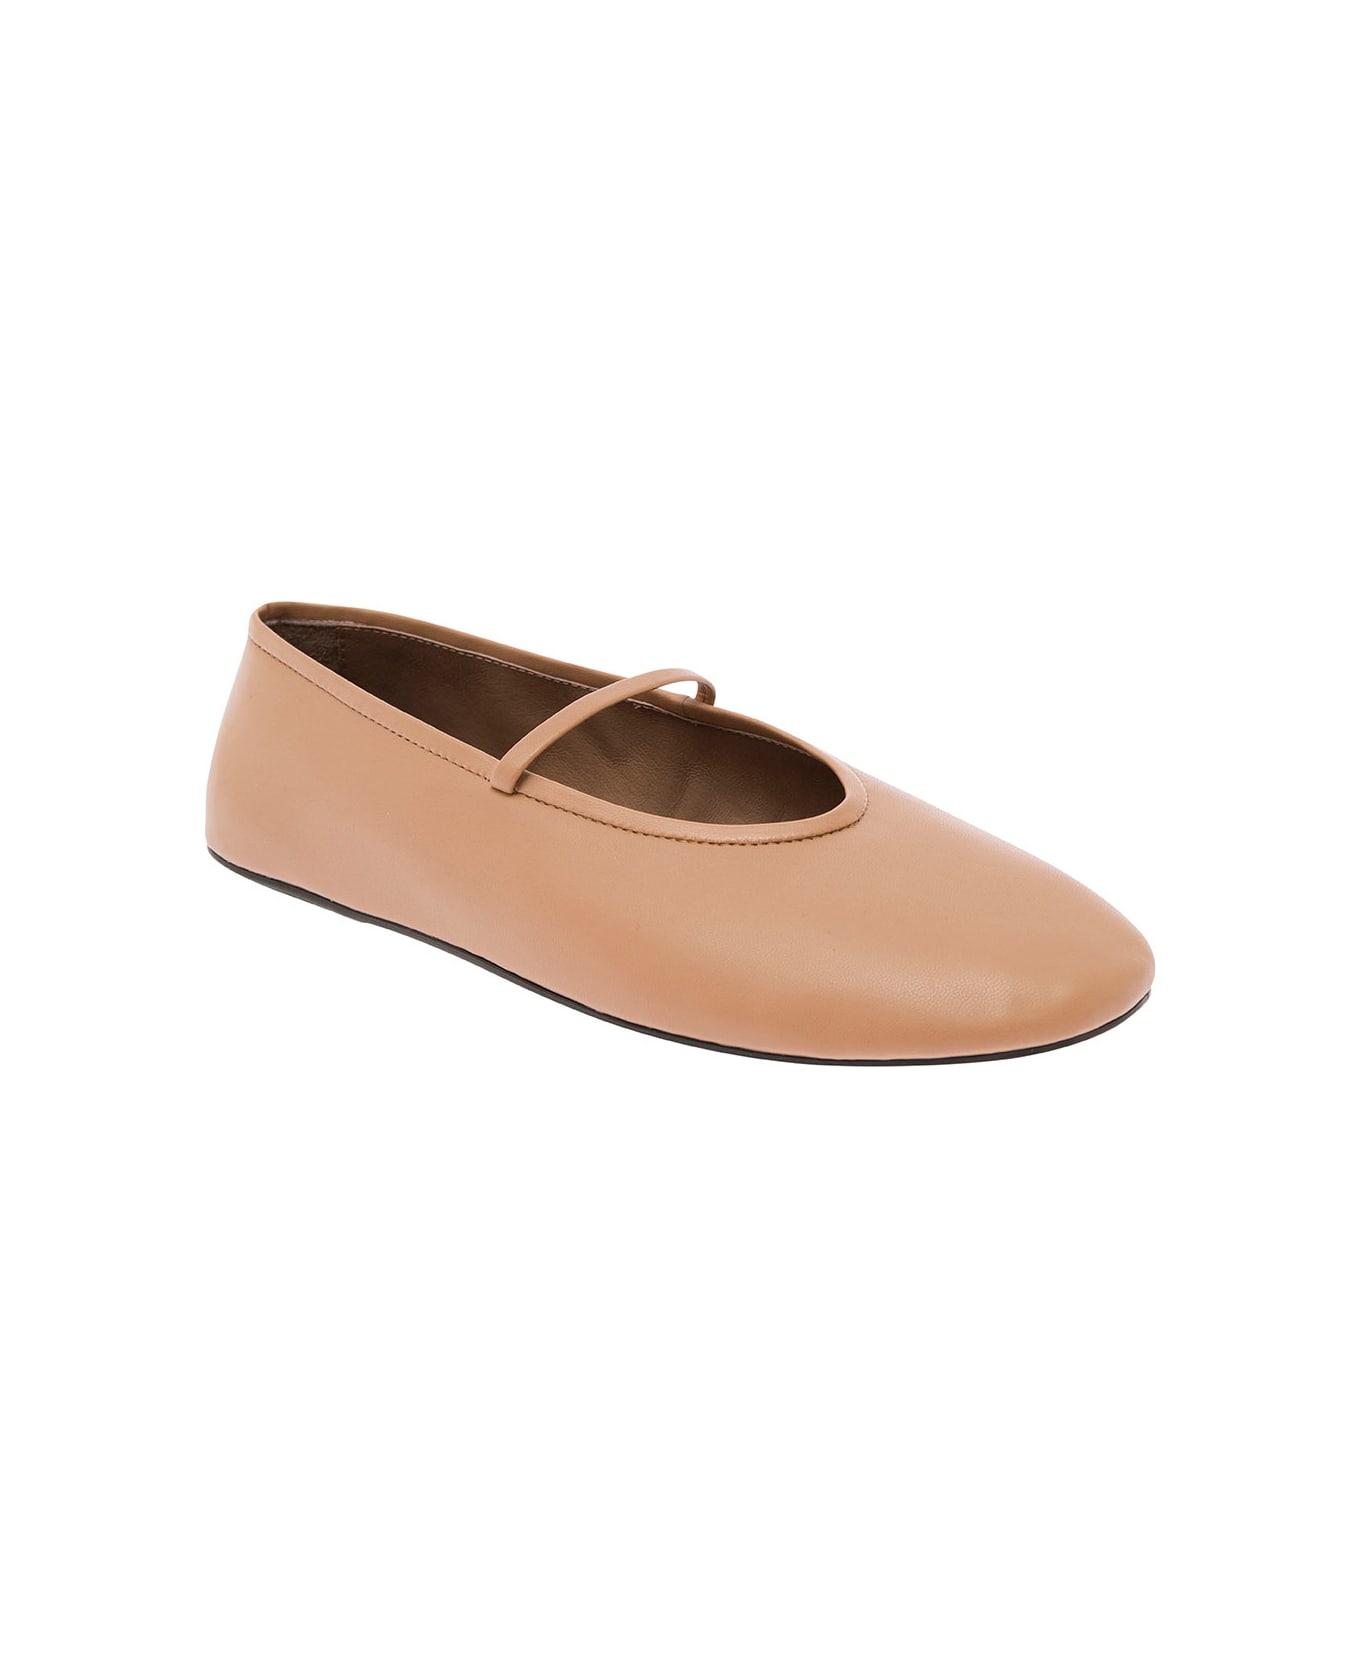 Jeffrey Campbell Beige Ballet Flats With Almond Toe In Eco Leather Woman - Beige